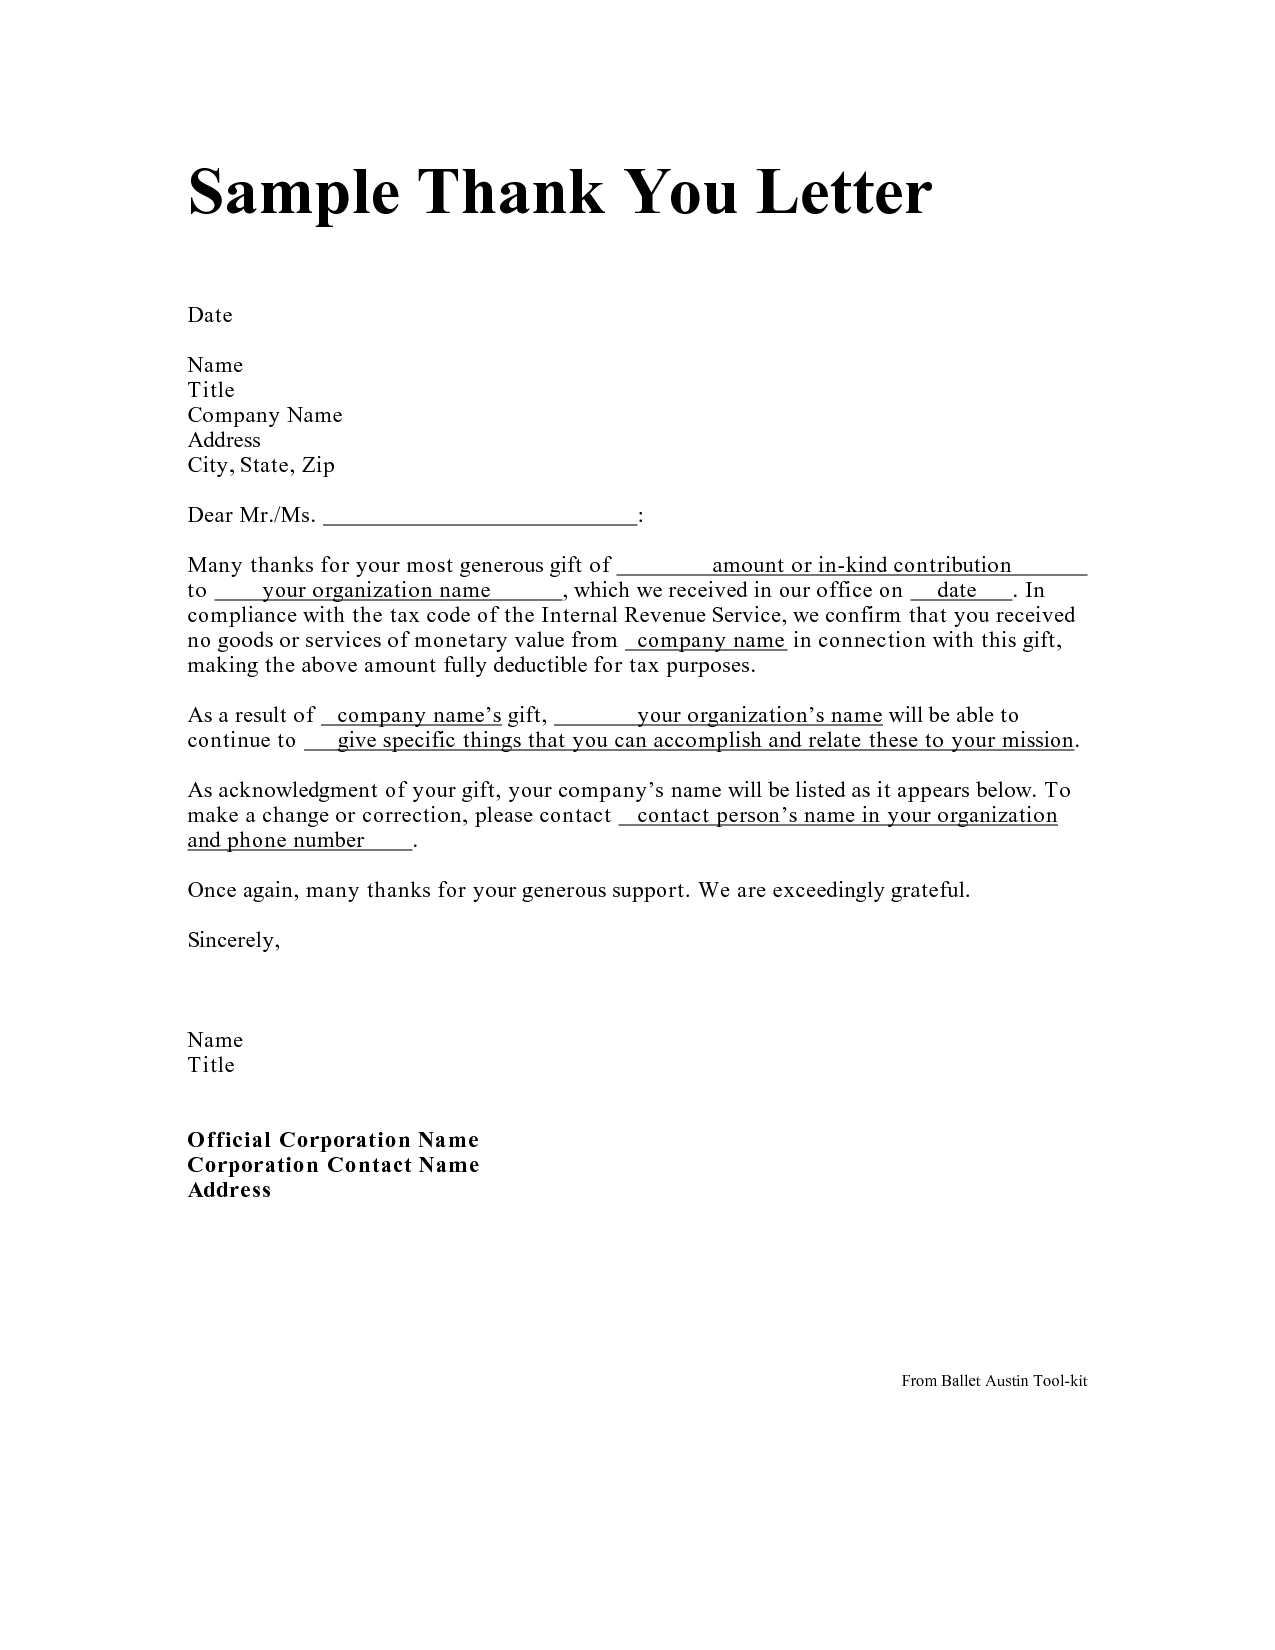 Charitable Contribution Letter Template - Personal Thank You Letter Personal Thank You Letter Samples